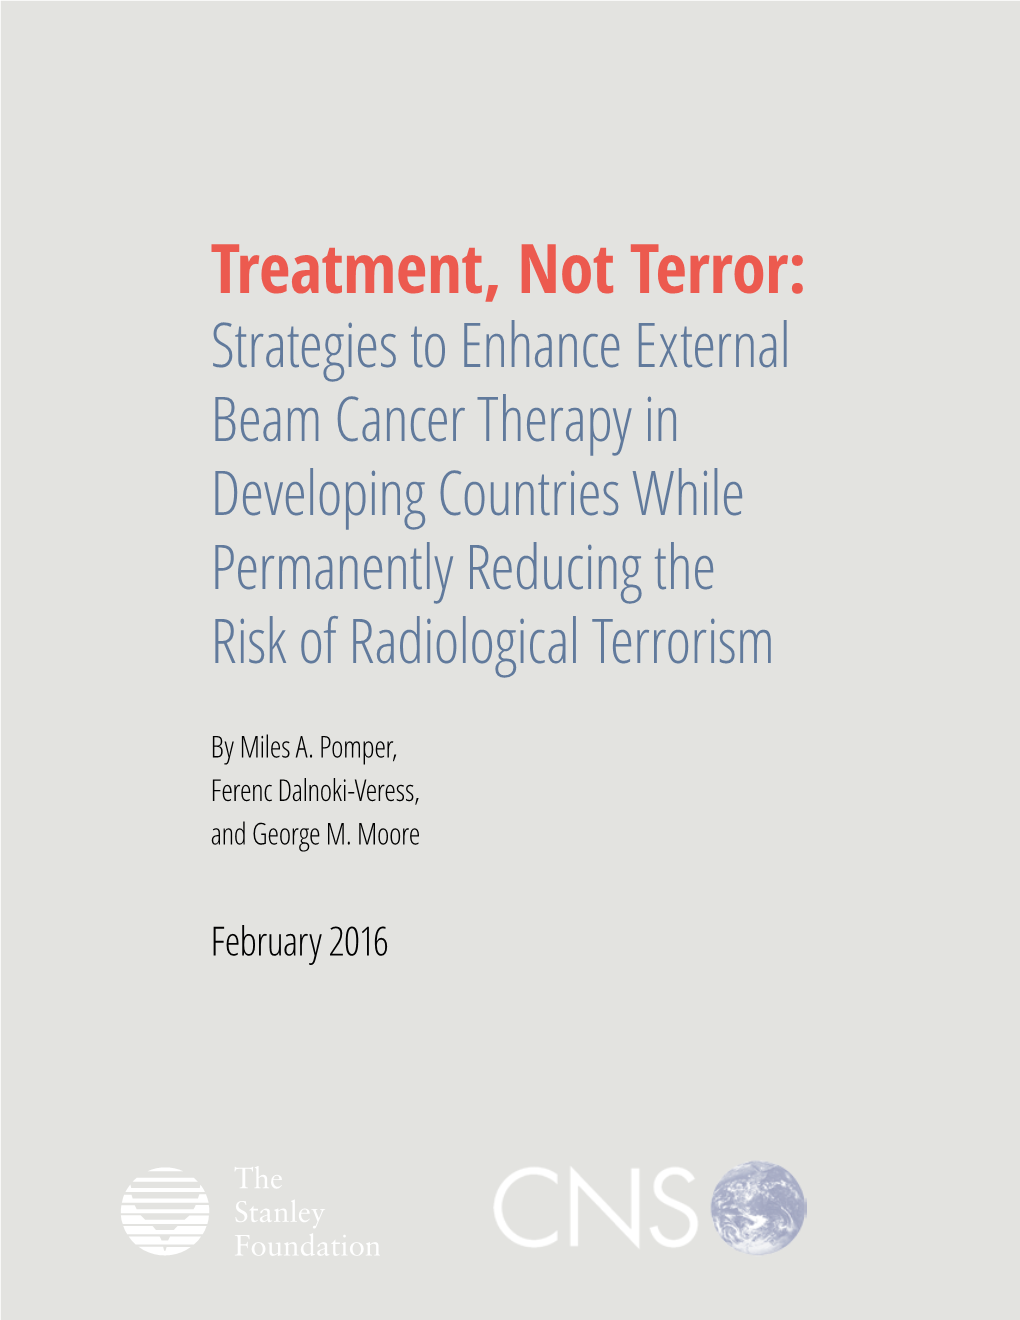 Treatment, Not Terror: Strategies to Enhance External Beam Cancer Therapy in Developing Countries While Permanently Reducing the Risk of Radiological Terrorism